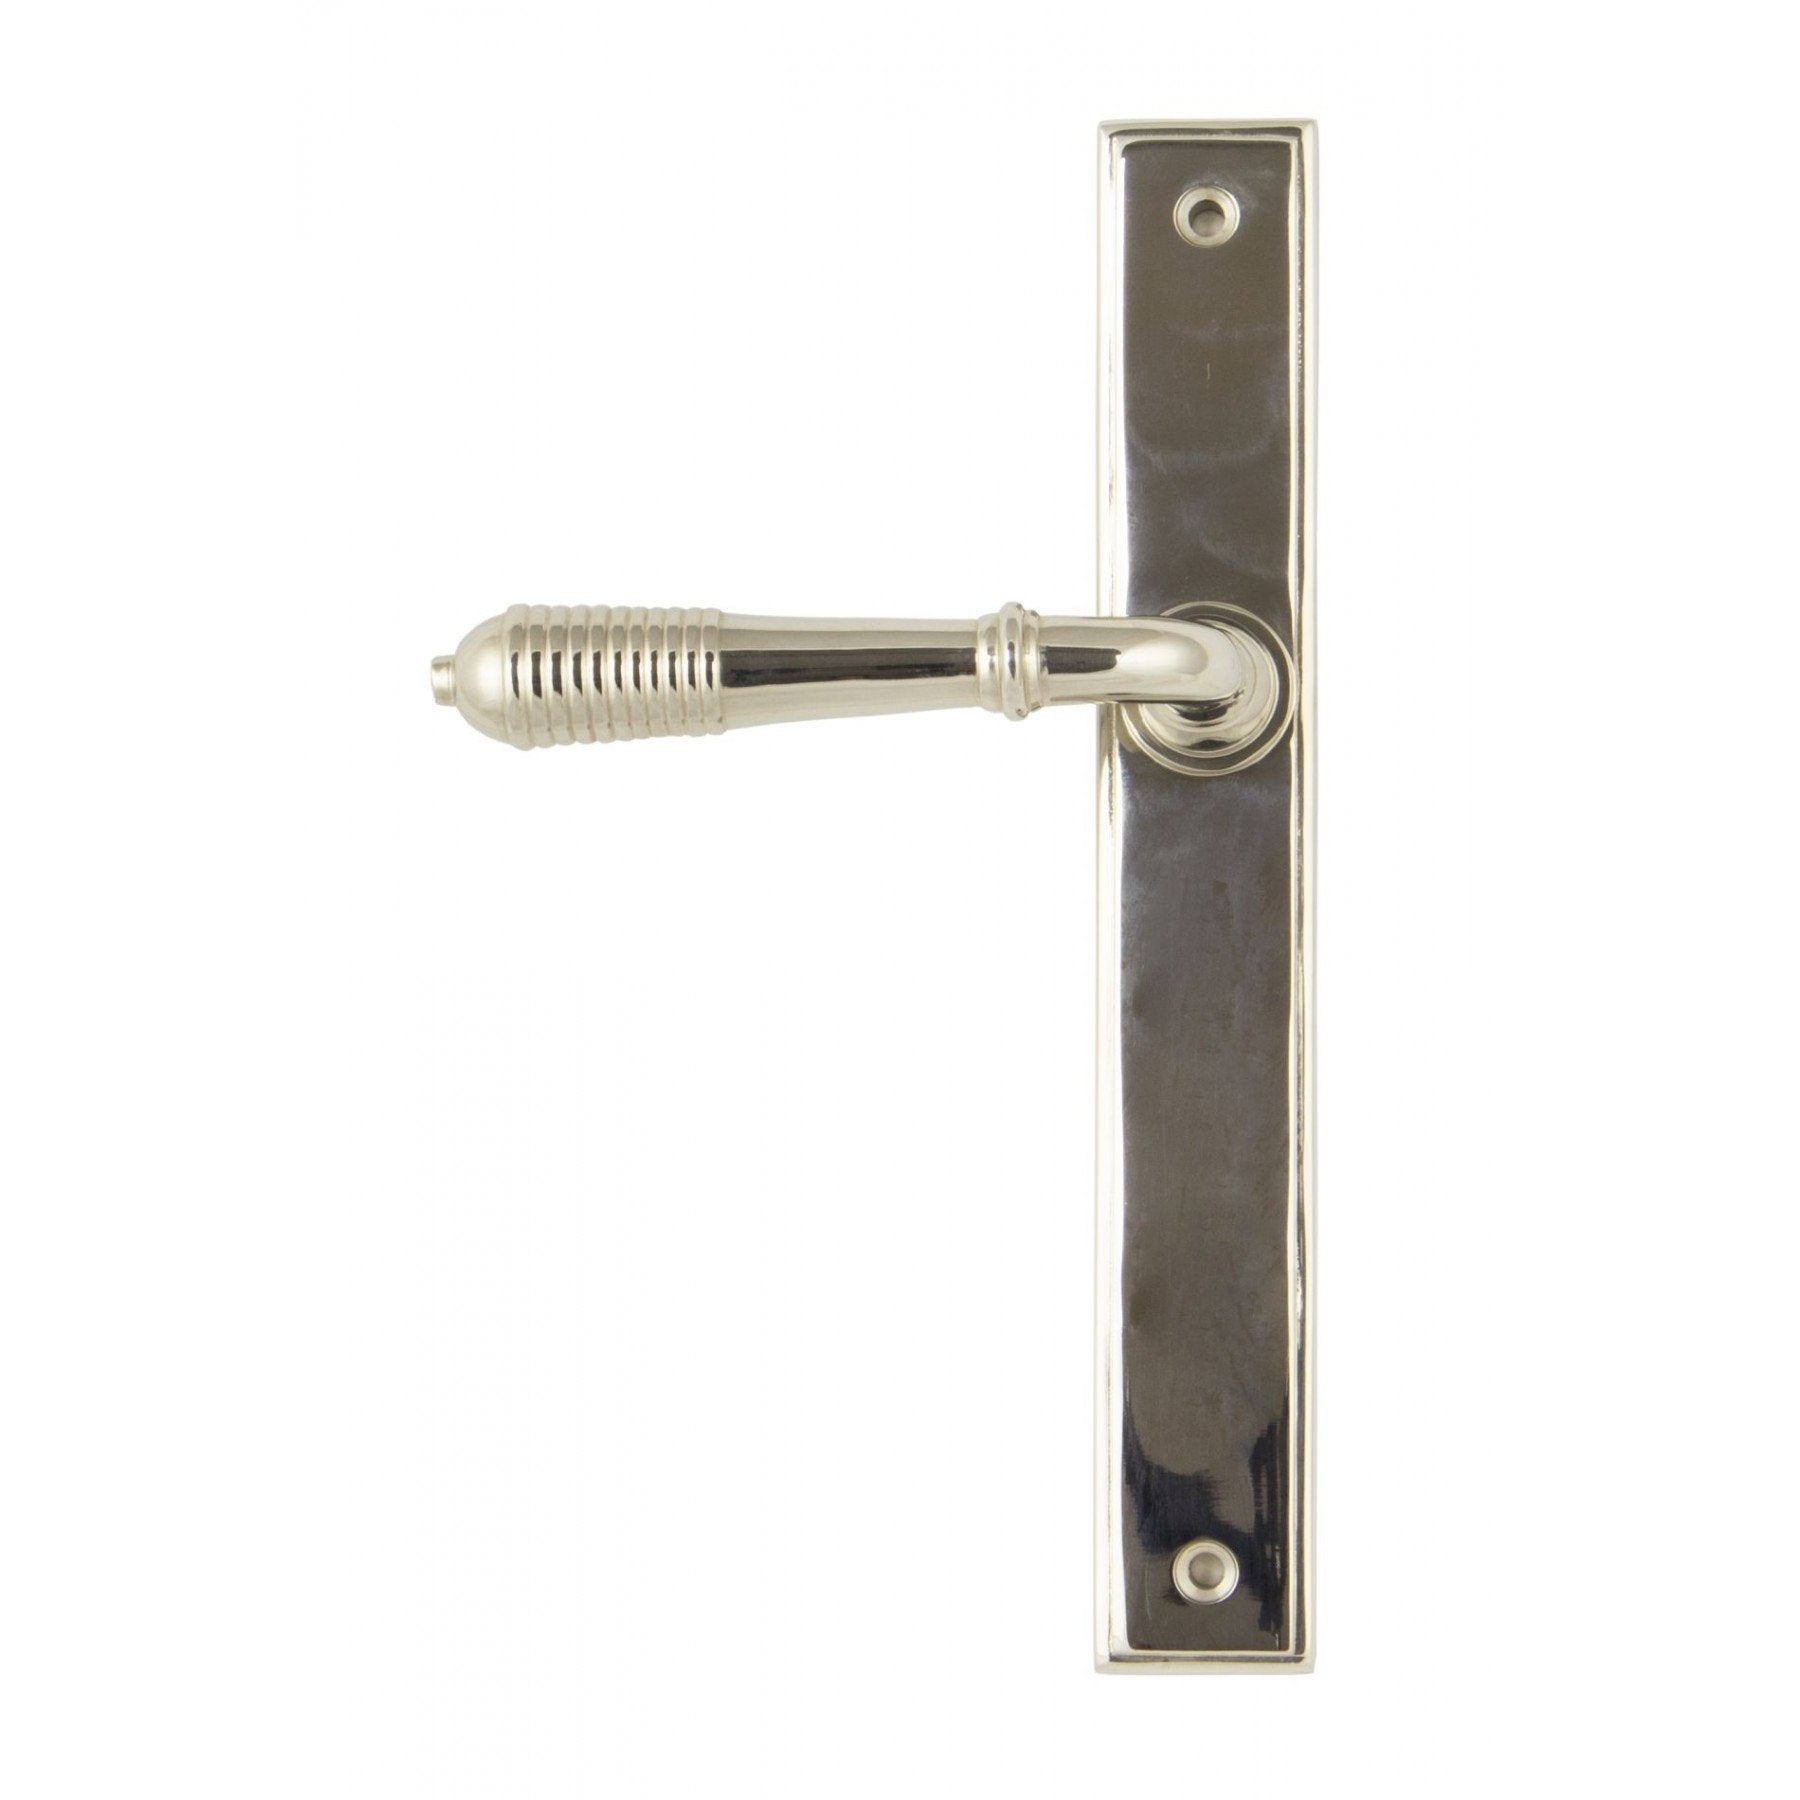 From the Anvil Polished Nickel Reeded Slimline Lever Latch Set - No.42 Interiors